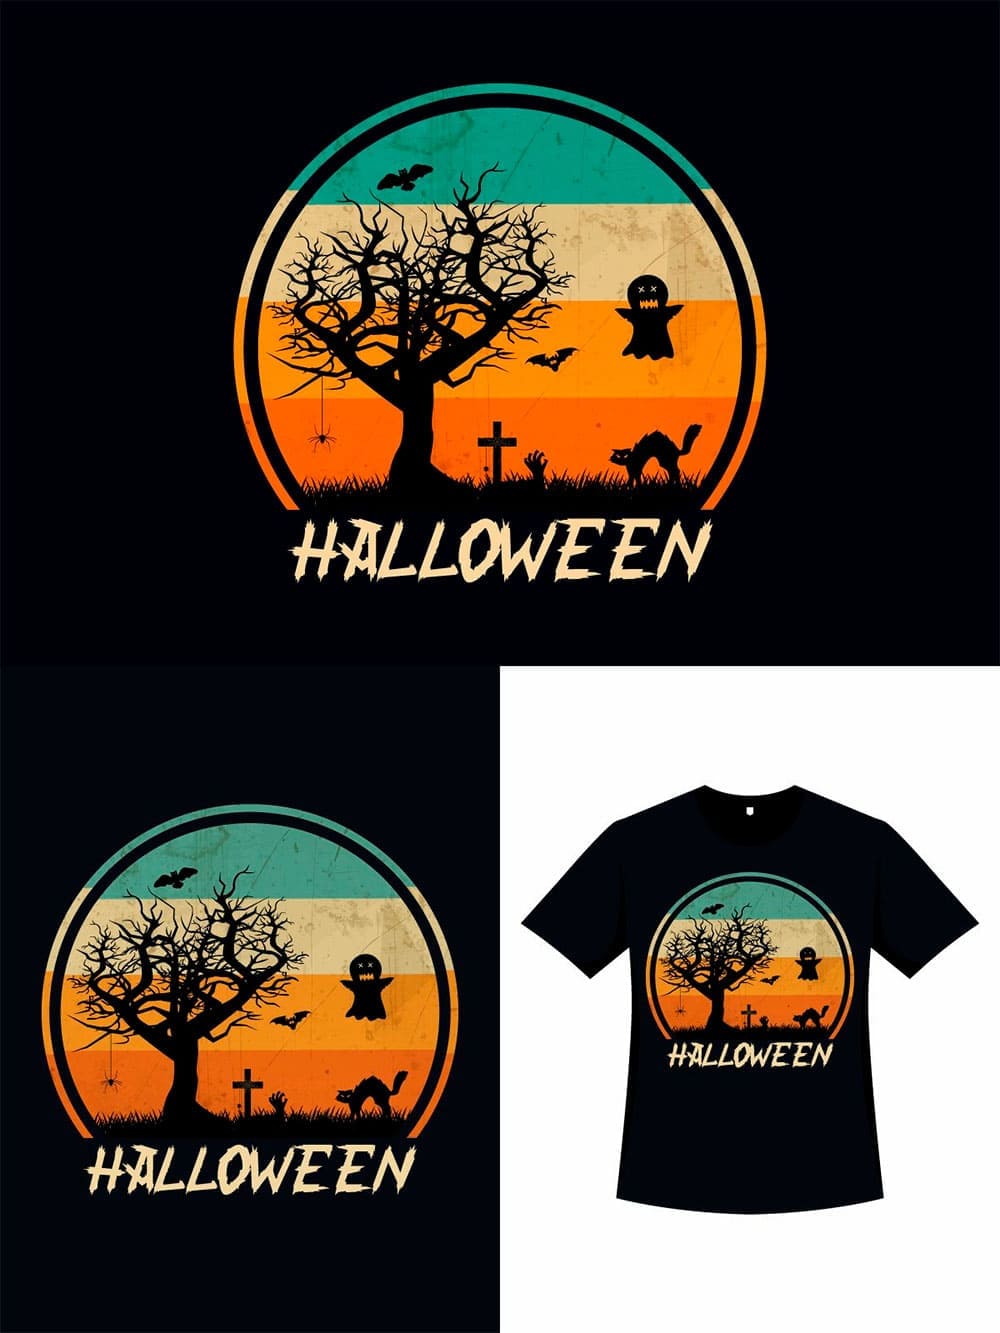 Halloween stylish retro color t-shirt, picture for pinterest 1000x1333.